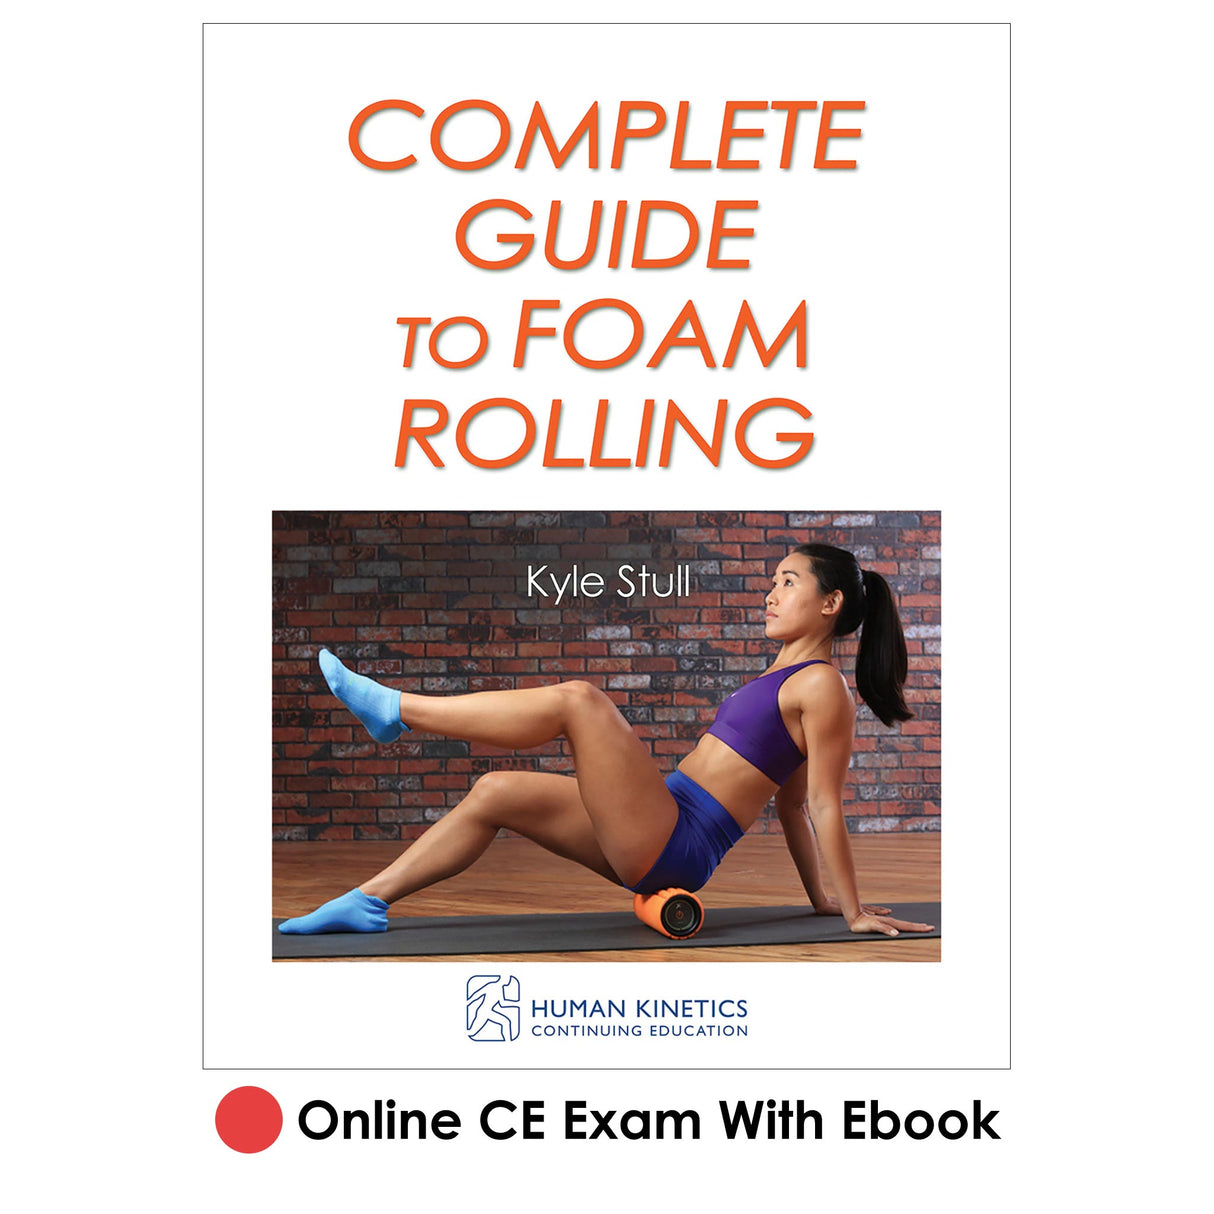 Complete Guide to Foam Rolling Online CE Exam With Ebook